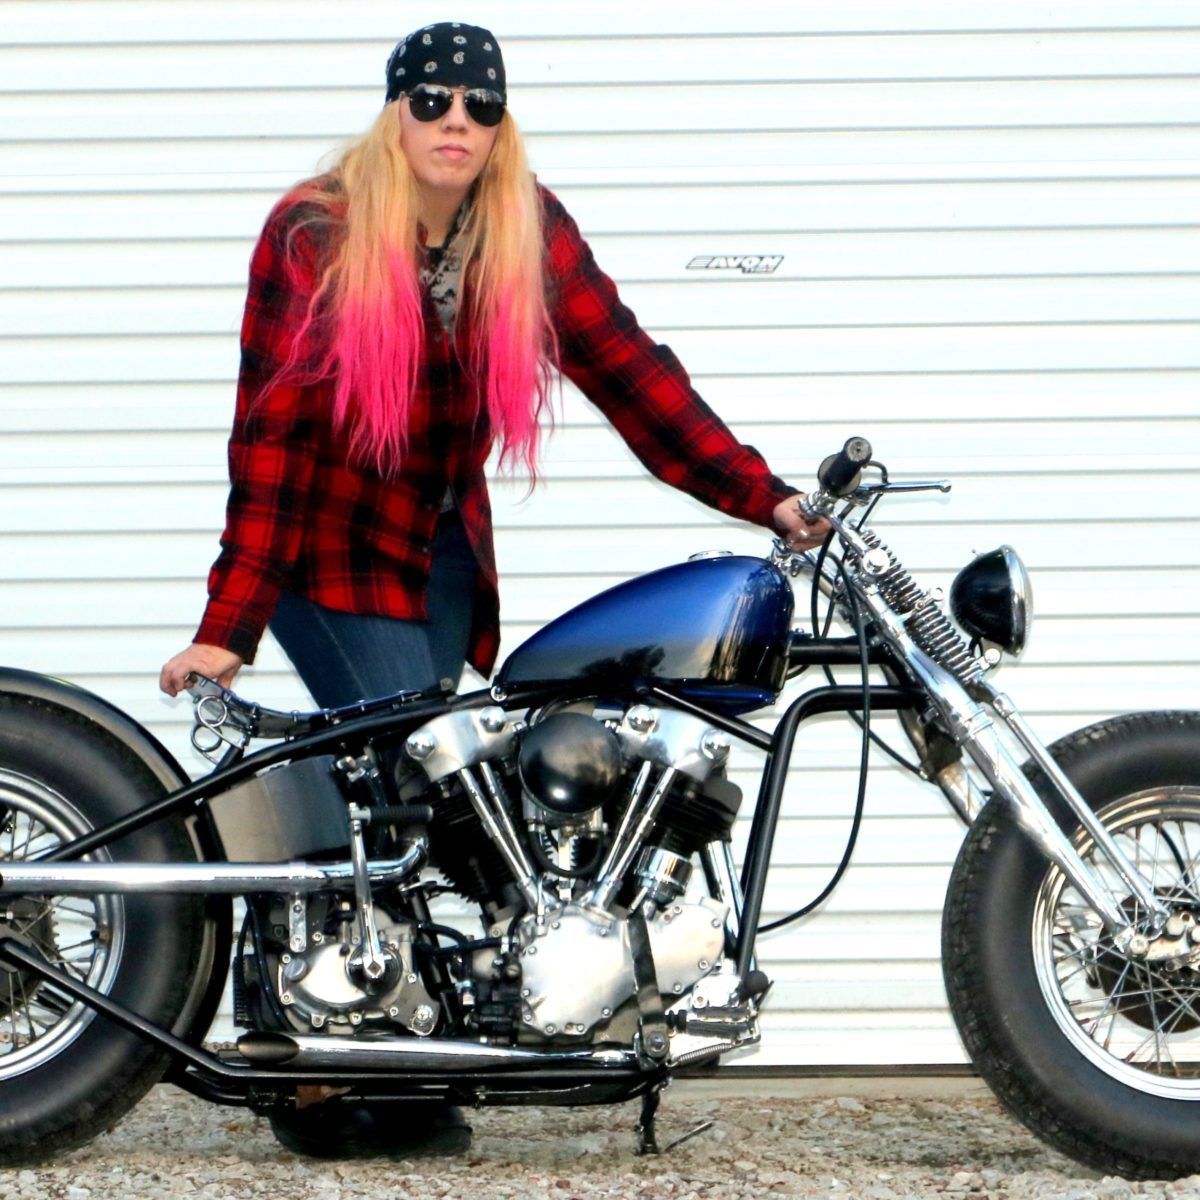 Chris Gibbany poses against a white wall with her blue motorcycle